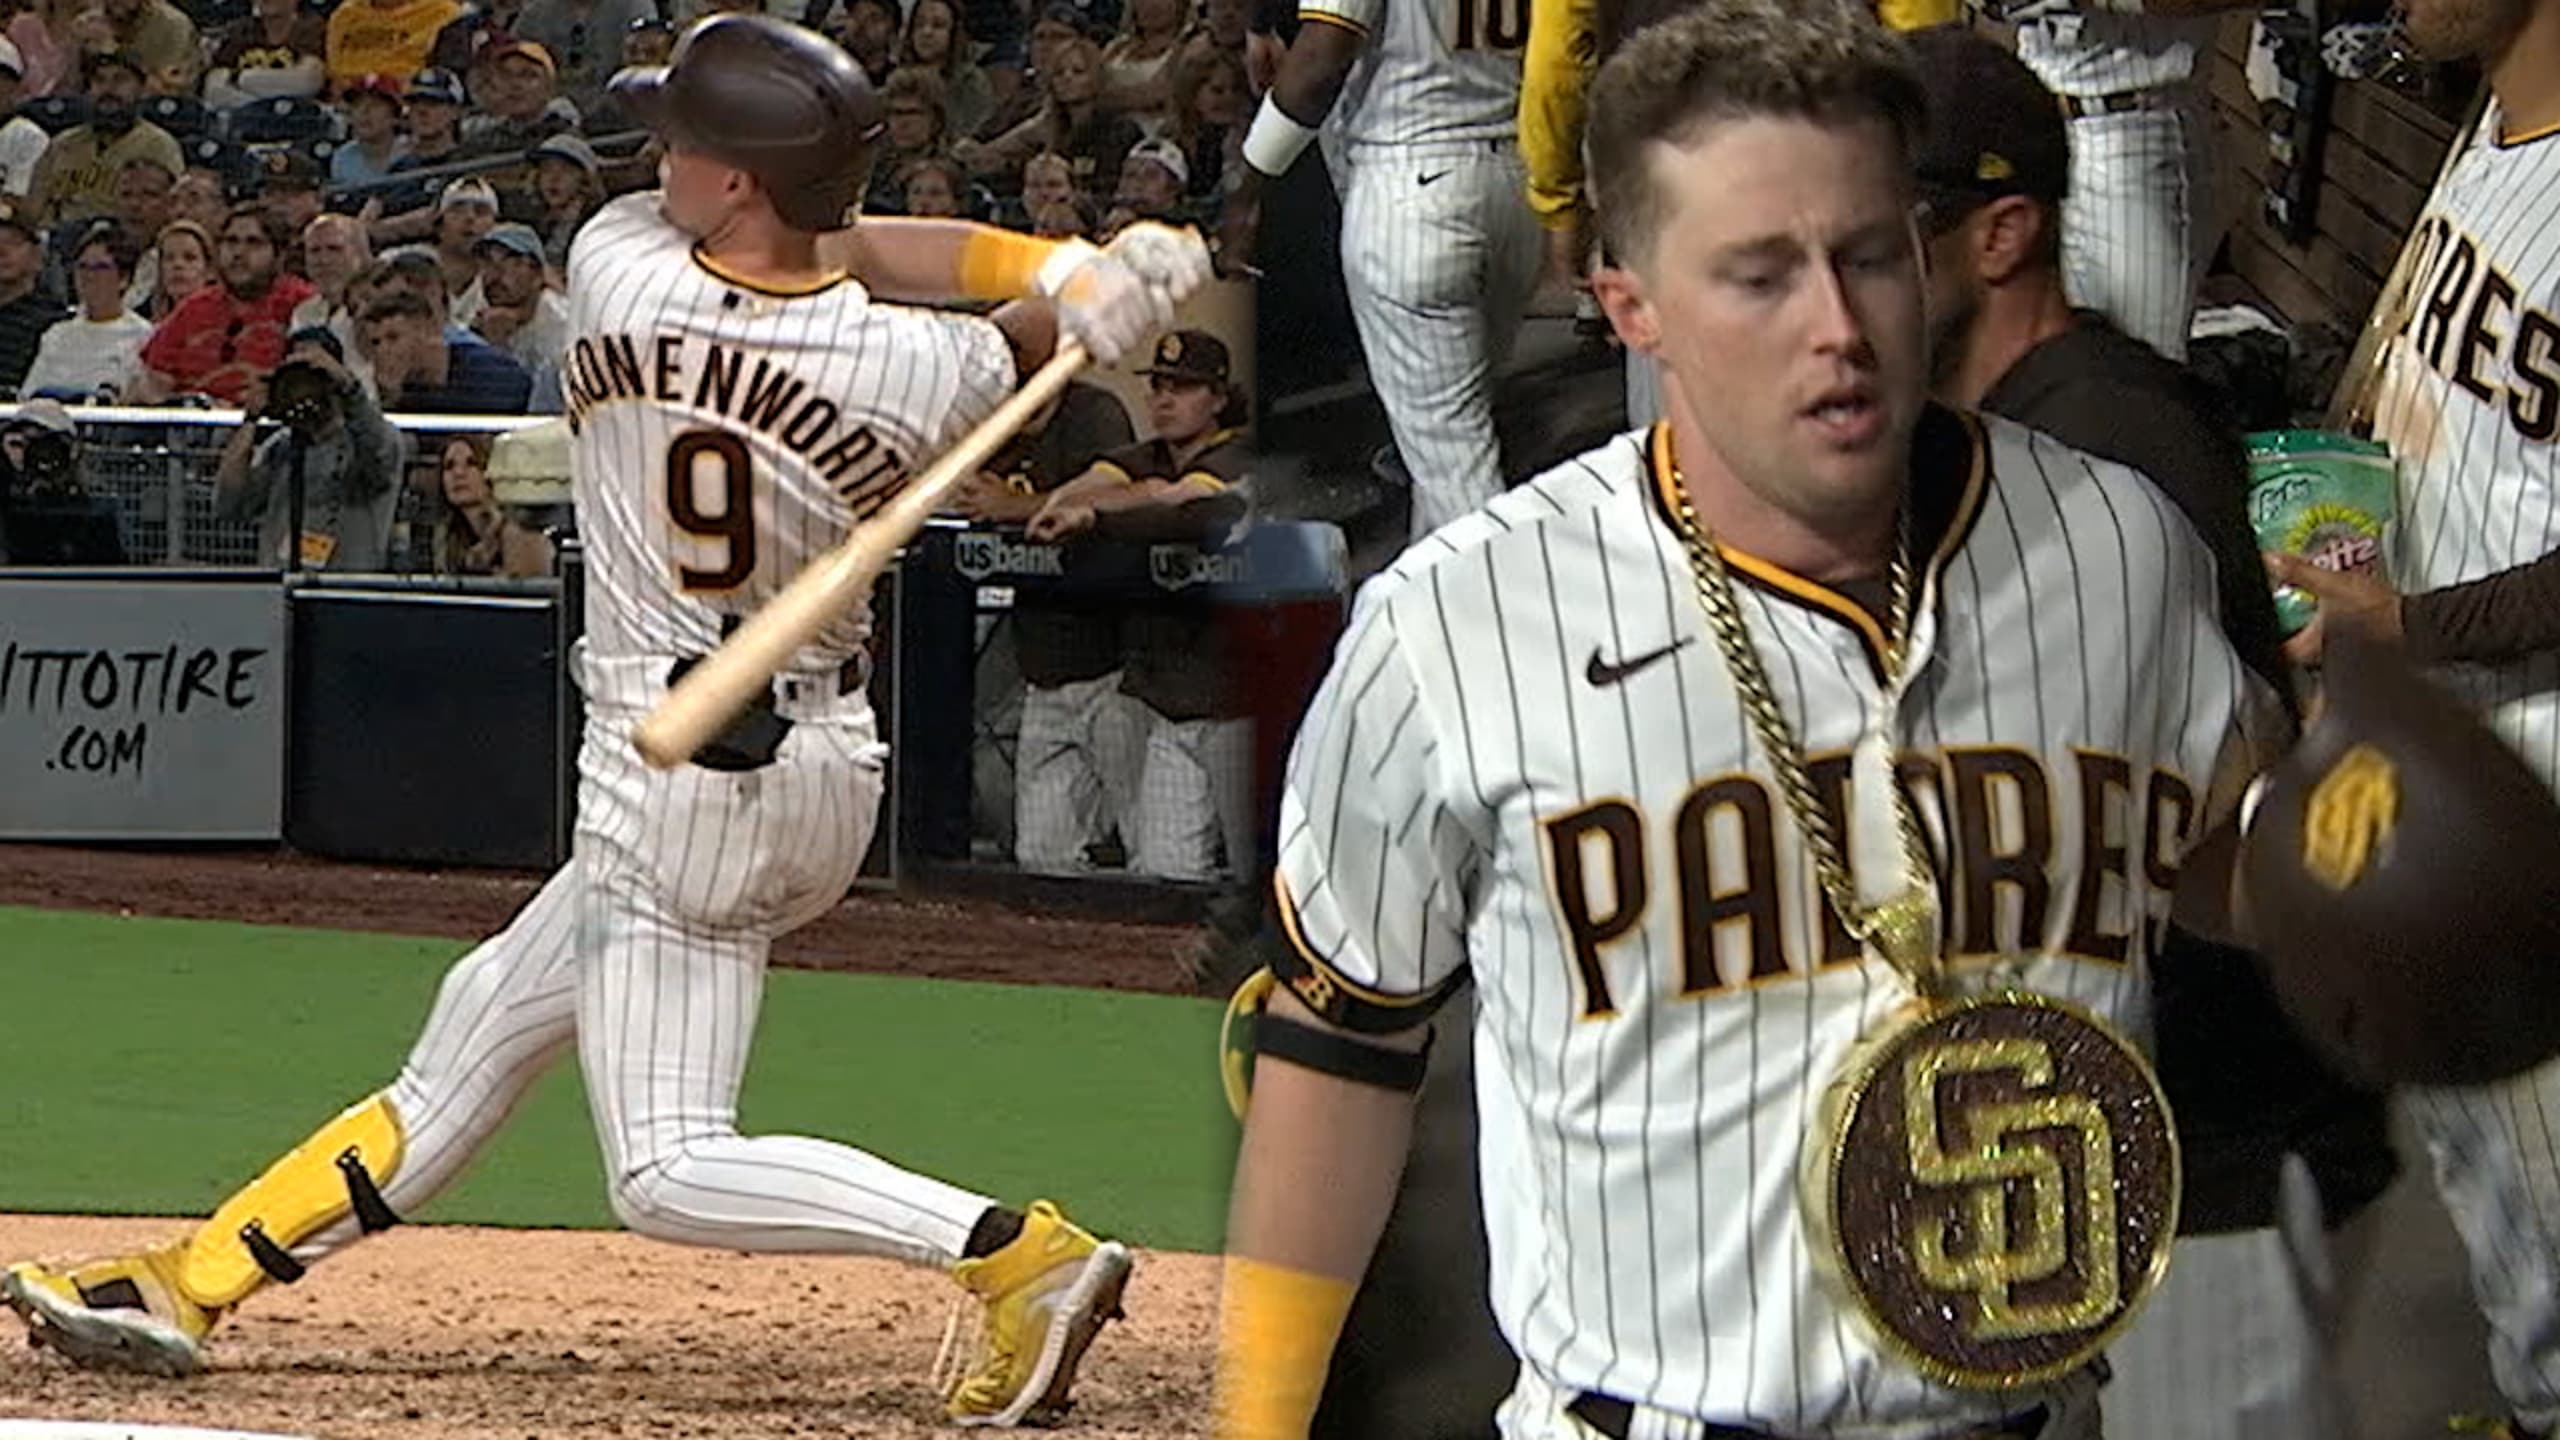 Jake Cronenworth of the San Diego Padres hits a three run homer in